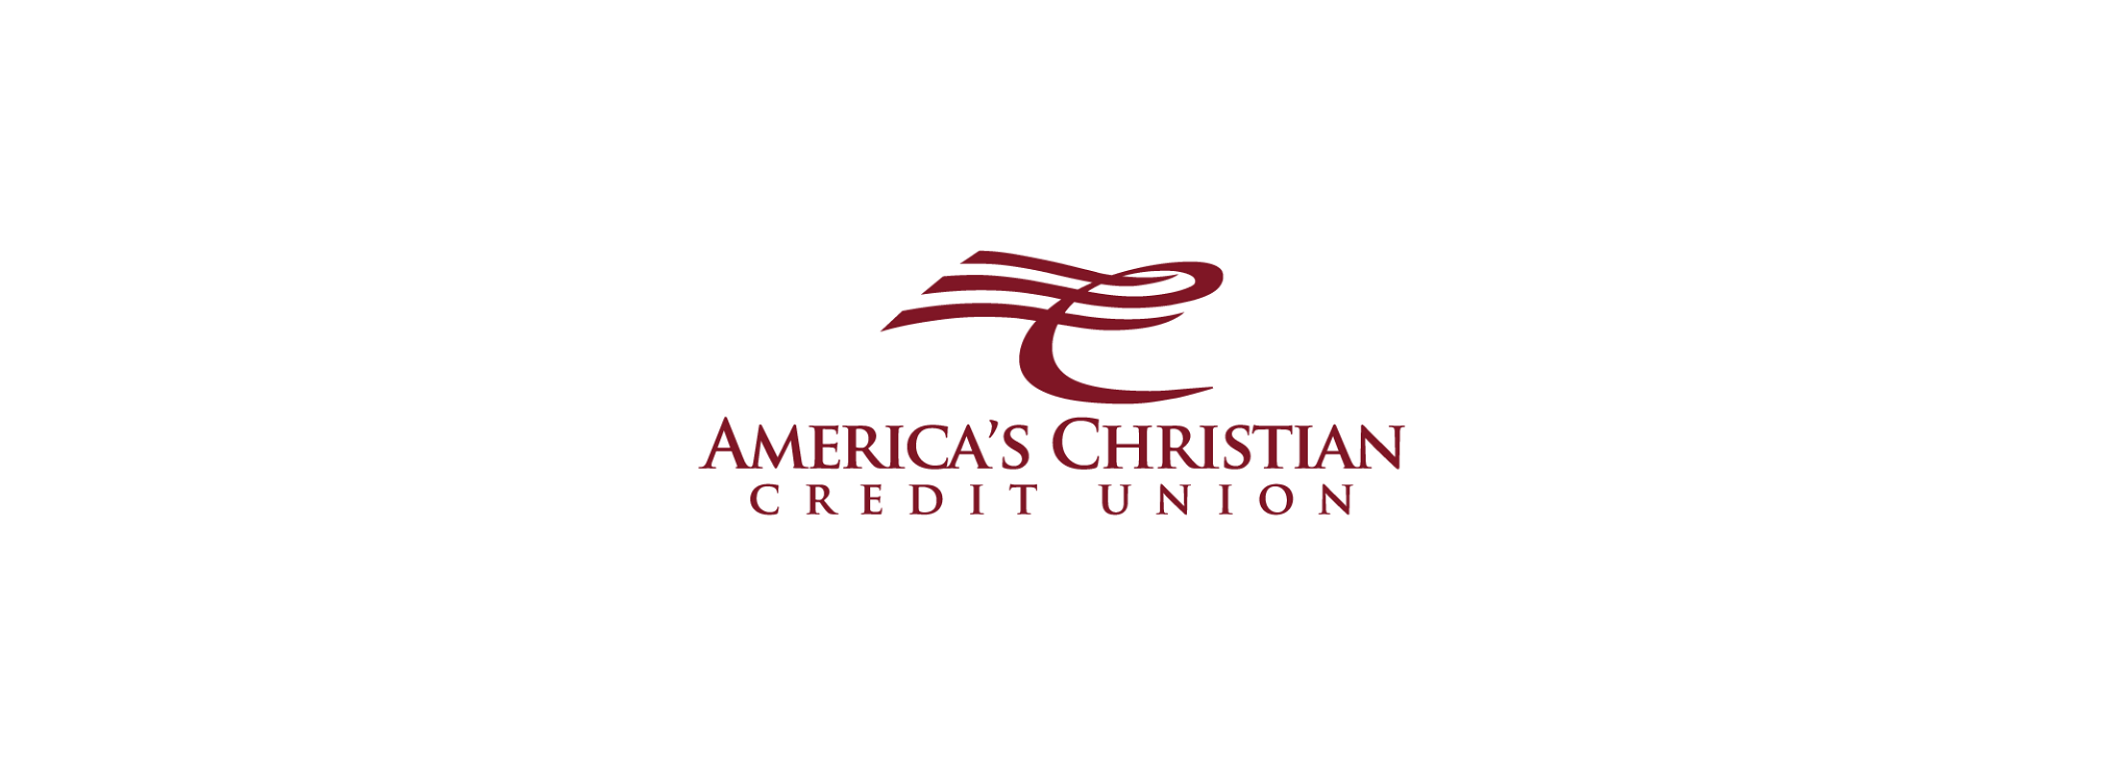 Samaha & Associates Successfully Manages America’s Christian Credit Union’s Core Conversion